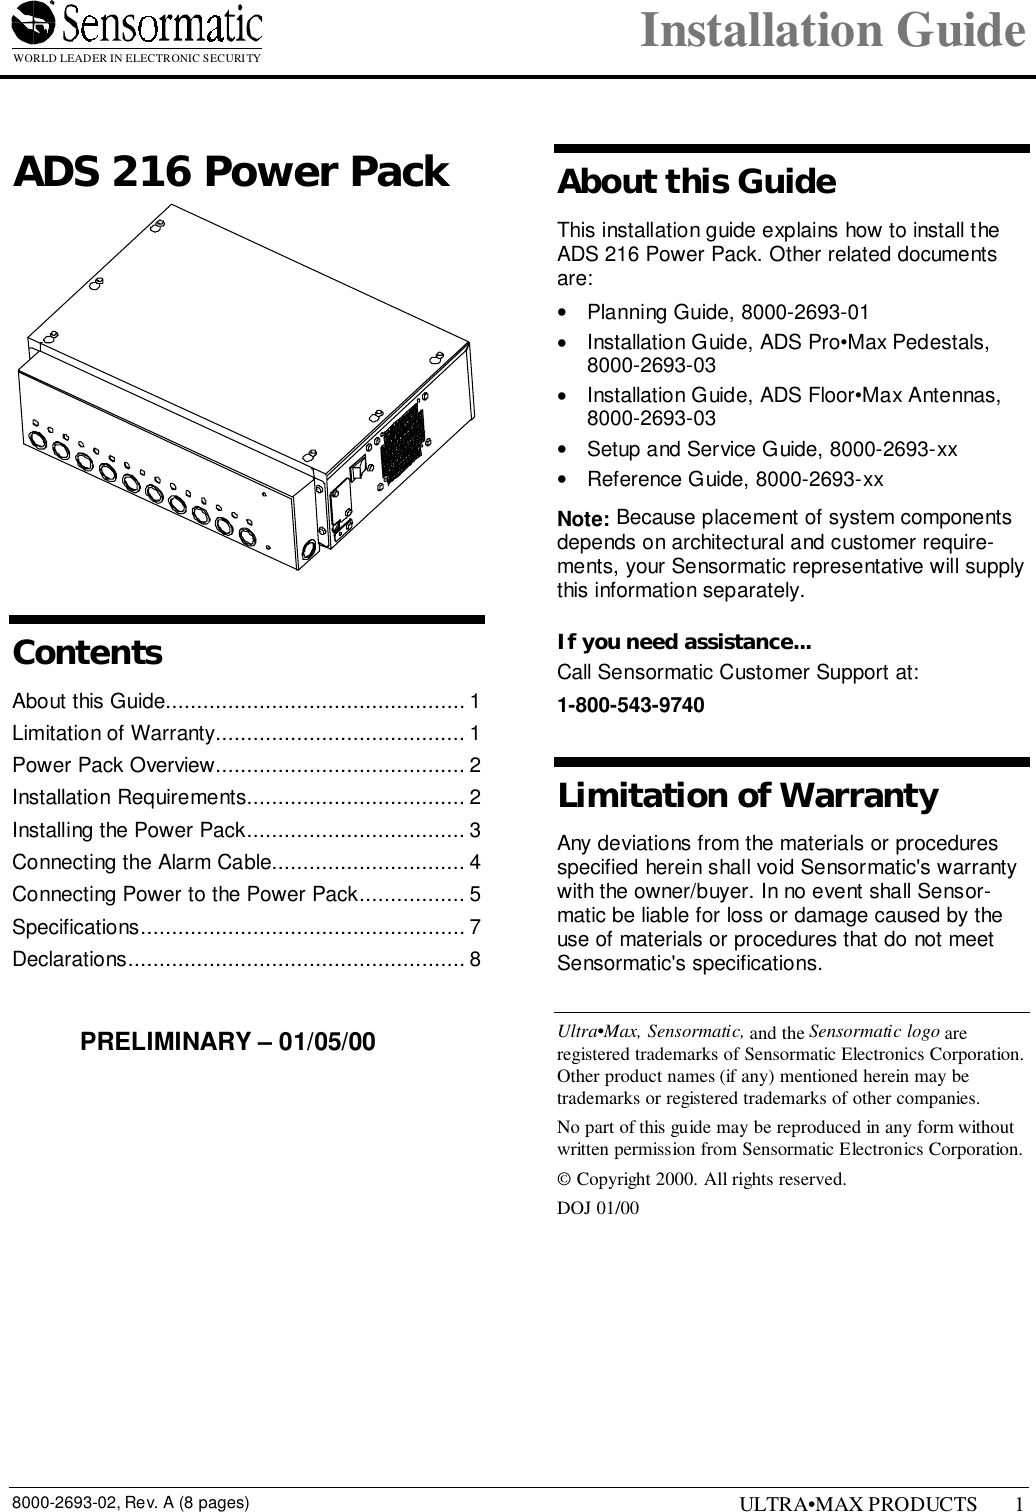 WORLD LEADER IN ELECTRONIC SECURITY Installation Guide8000-2693-02, Rev. A (8 pages) ULTRA•MAX PRODUCTS 11 ADS 216 Power PackContentsAbout this Guide................................................ 1Limitation of Warranty........................................ 1Power Pack Overview........................................ 2Installation Requirements................................... 2Installing the Power Pack................................... 3Connecting the Alarm Cable............................... 4Connecting Power to the Power Pack................. 5Specifications.................................................... 7Declarations...................................................... 8About this GuideThis installation guide explains how to install theADS 216 Power Pack. Other related documentsare:•  Planning Guide, 8000-2693-01•  Installation Guide, ADS Pro•Max Pedestals,8000-2693-03•  Installation Guide, ADS Floor•Max Antennas,8000-2693-03•  Setup and Service Guide, 8000-2693-xx•  Reference Guide, 8000-2693-xxNote: Because placement of system componentsdepends on architectural and customer require-ments, your Sensormatic representative will supplythis information separately.If you need assistance...Call Sensormatic Customer Support at:1-800-543-9740Limitation of WarrantyAny deviations from the materials or proceduresspecified herein shall void Sensormatic&apos;s warrantywith the owner/buyer. In no event shall Sensor-matic be liable for loss or damage caused by theuse of materials or procedures that do not meetSensormatic&apos;s specifications.Ultra•Max, Sensormatic, and the Sensormatic logo areregistered trademarks of Sensormatic Electronics Corporation.Other product names (if any) mentioned herein may betrademarks or registered trademarks of other companies.No part of this guide may be reproduced in any form withoutwritten permission from Sensormatic Electronics Corporation.© Copyright 2000. All rights reserved.DOJ 01/00PRELIMINARY – 01/05/00